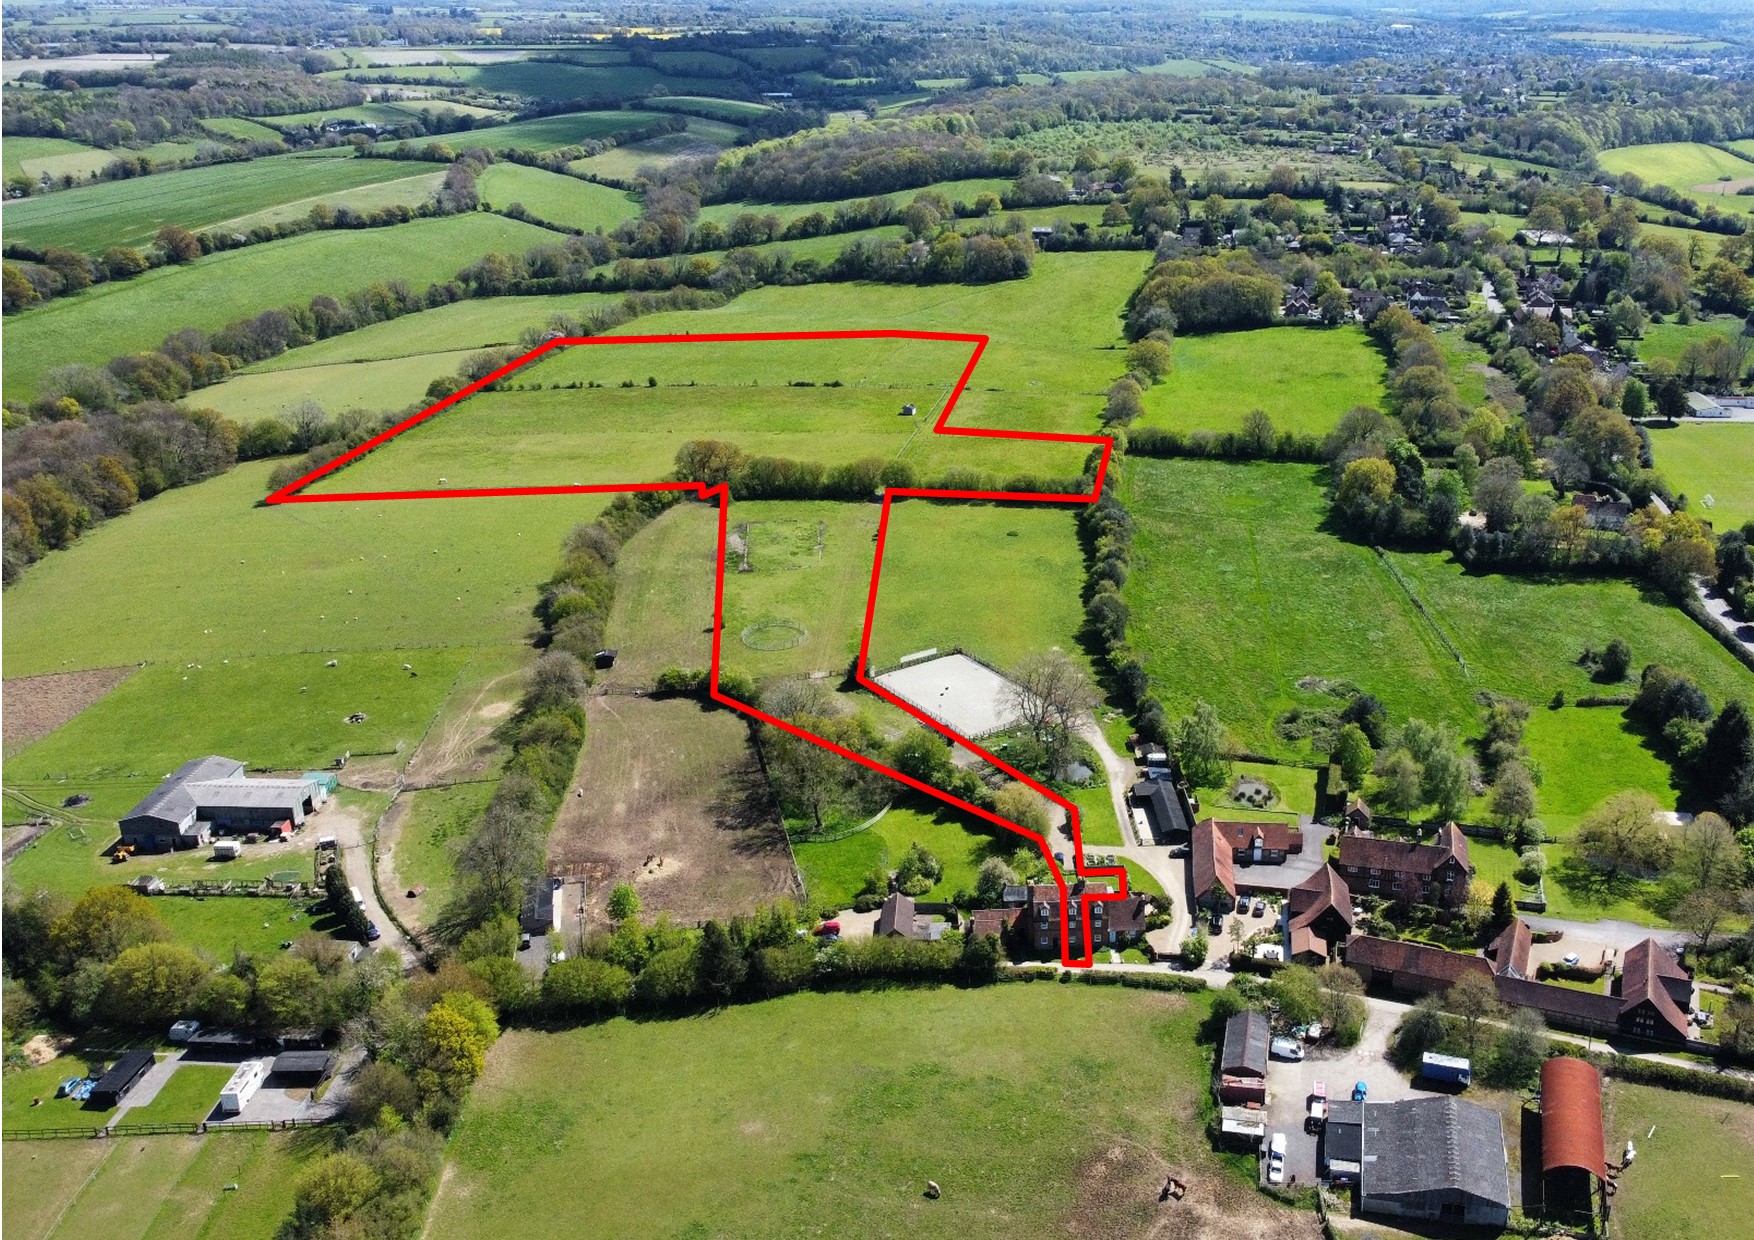 Similar property | 2 Bellingdon Farm Cottages with Stables and 15.28 acres - Chesham